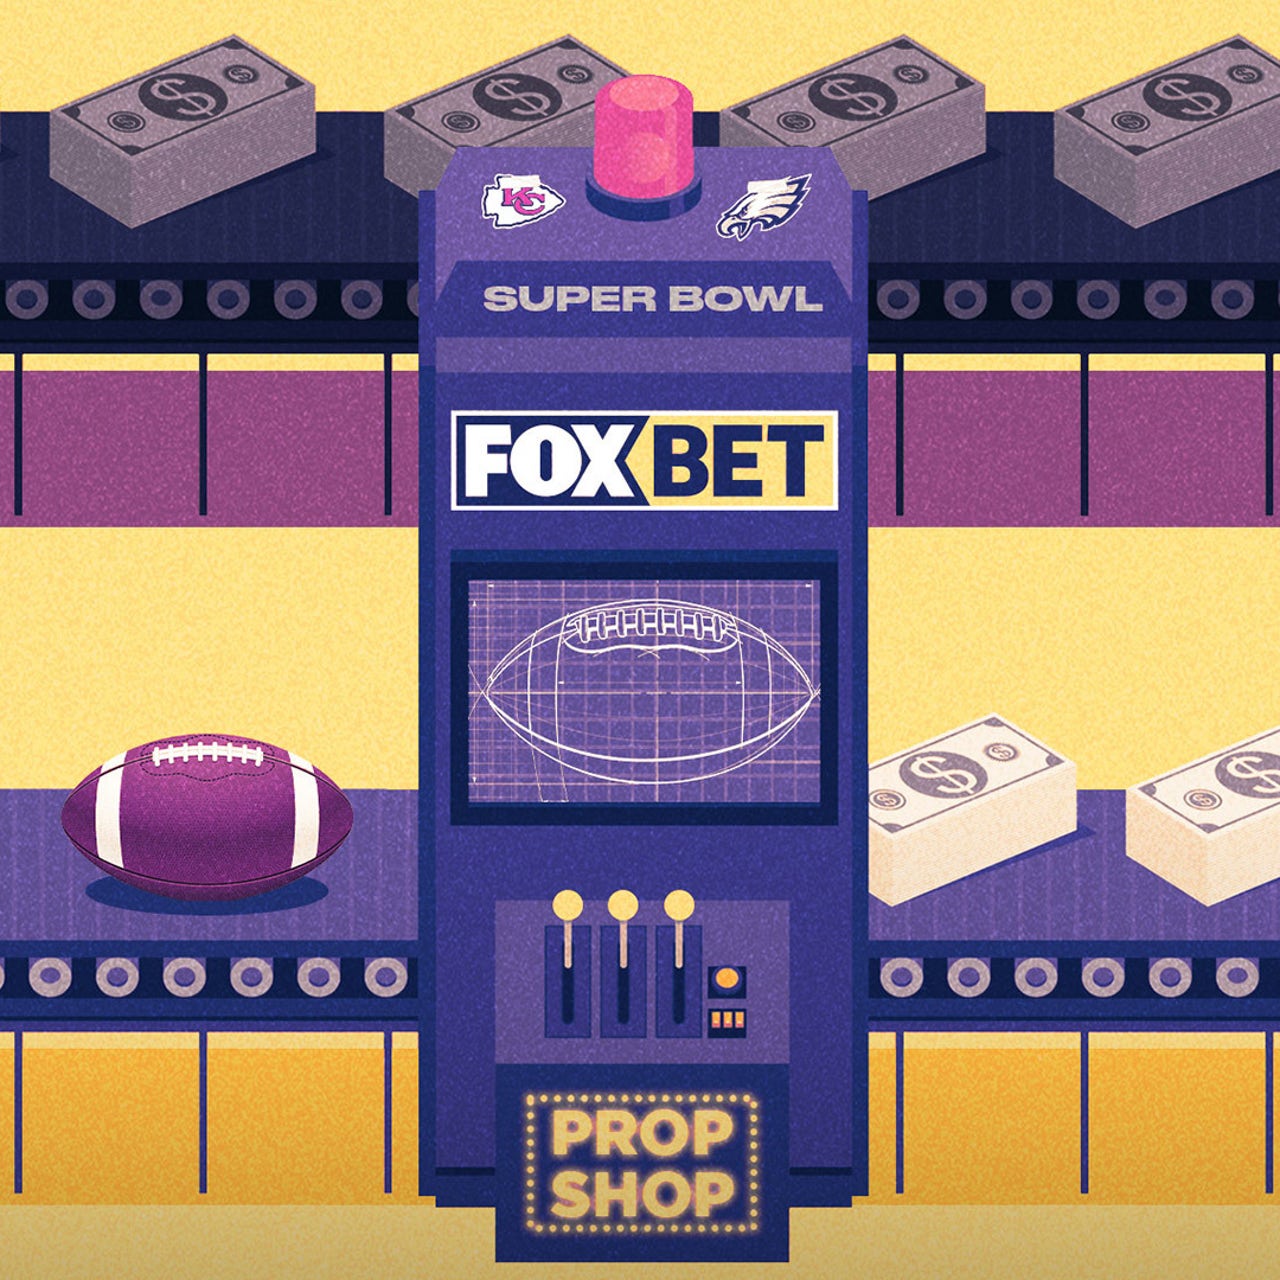 Super Bowl 2023 odds: Recounting the history of Super Bowl prop bets